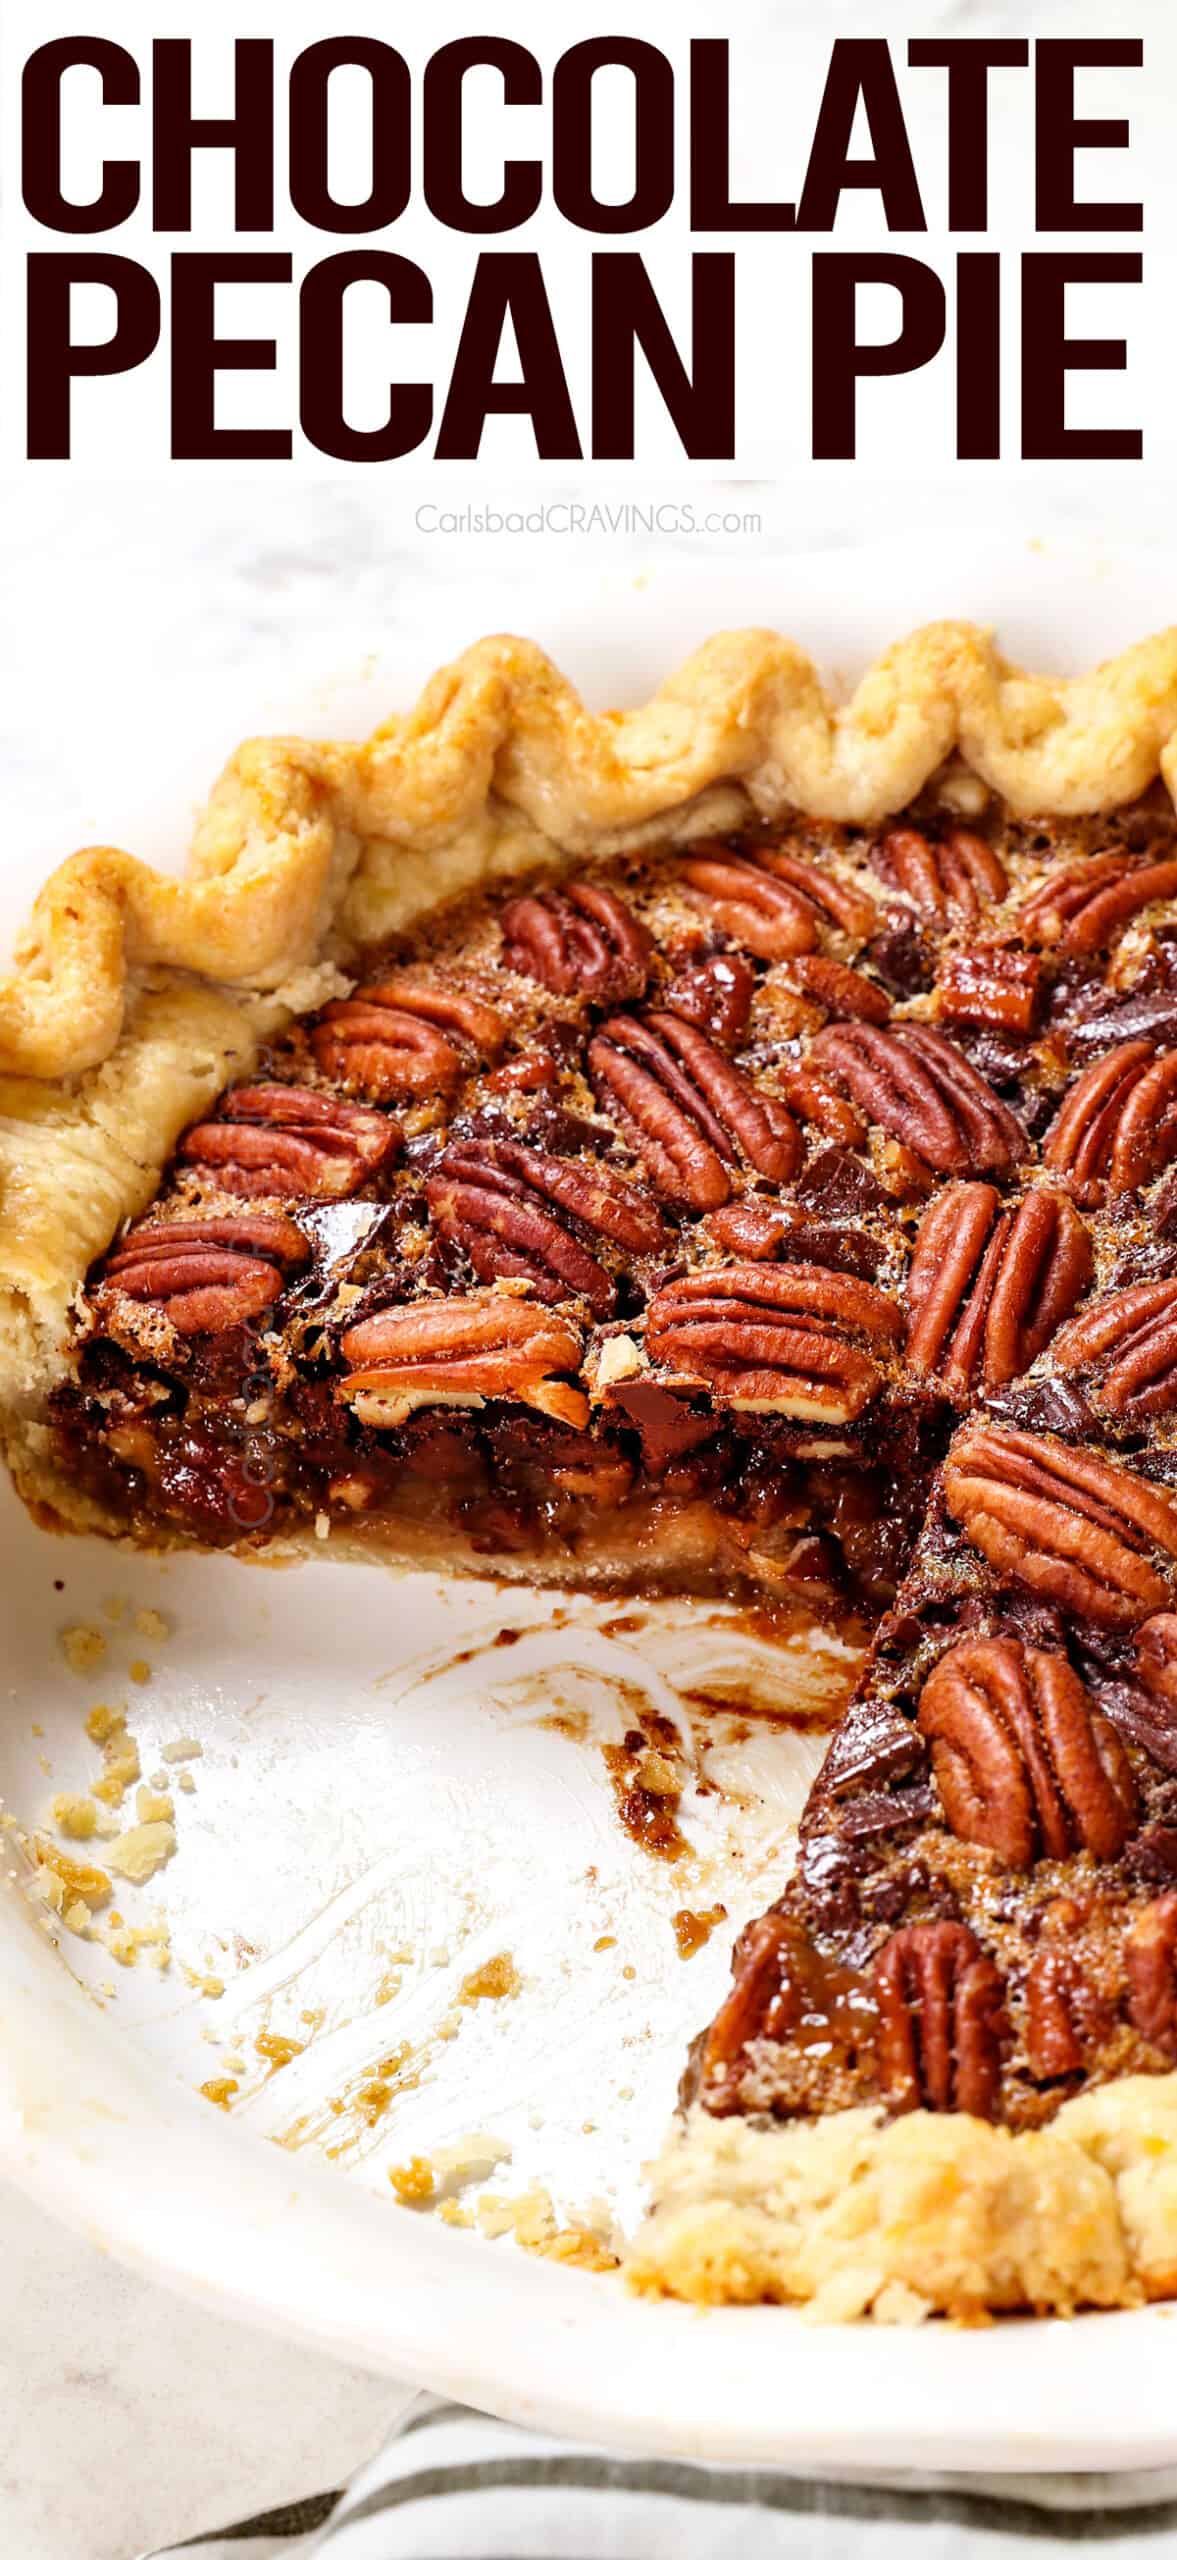 chocolate pecan pie in a white pie dish with slices missing showing the inside filling